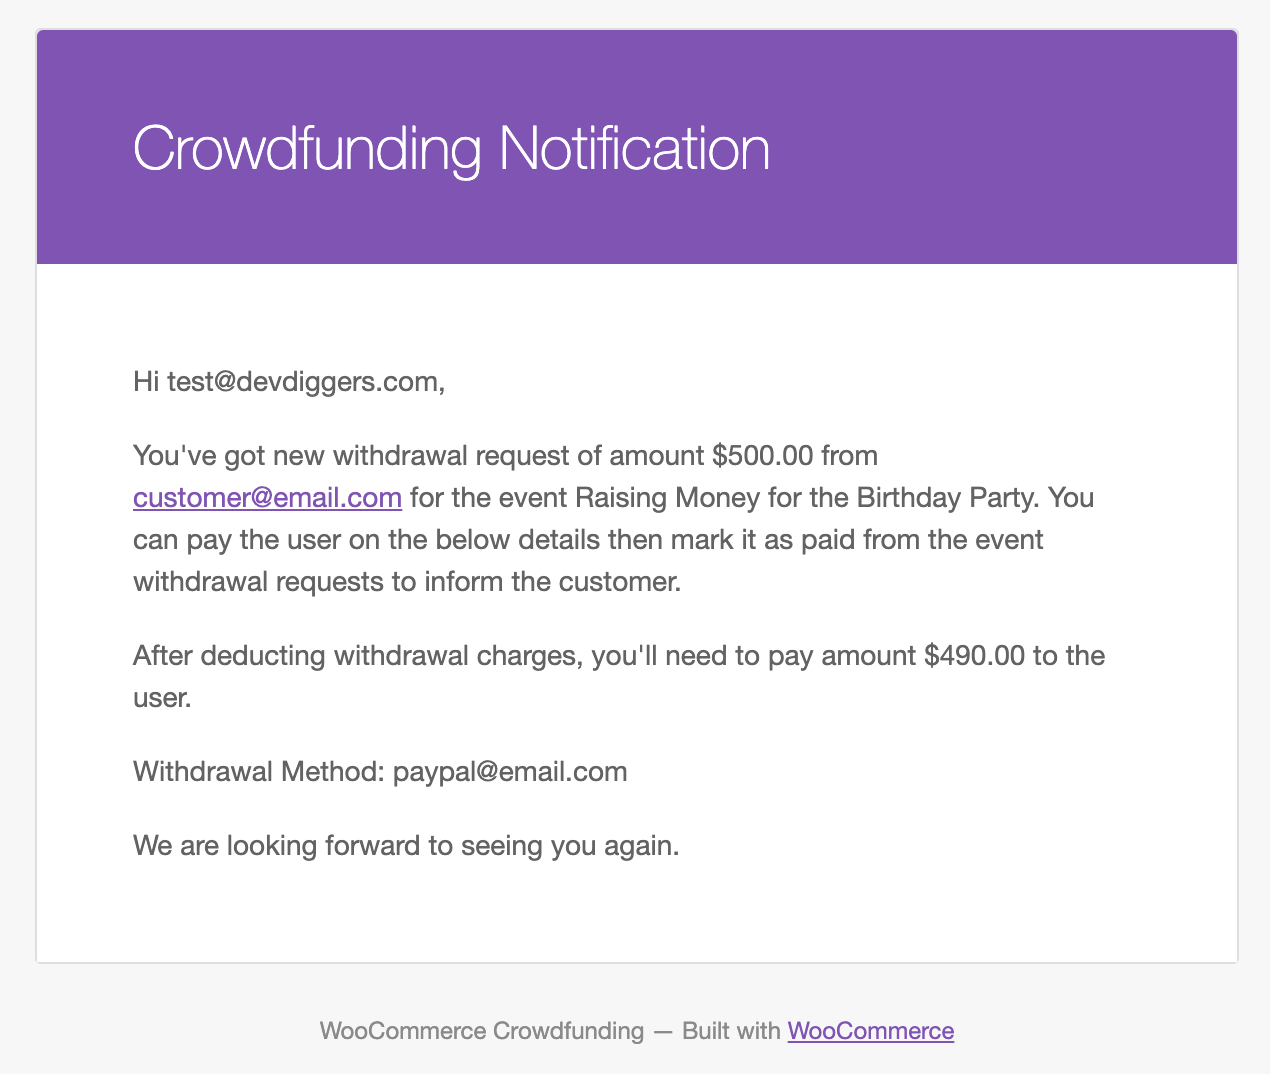 WooCommerce Crowdfunding new withdrawal request email